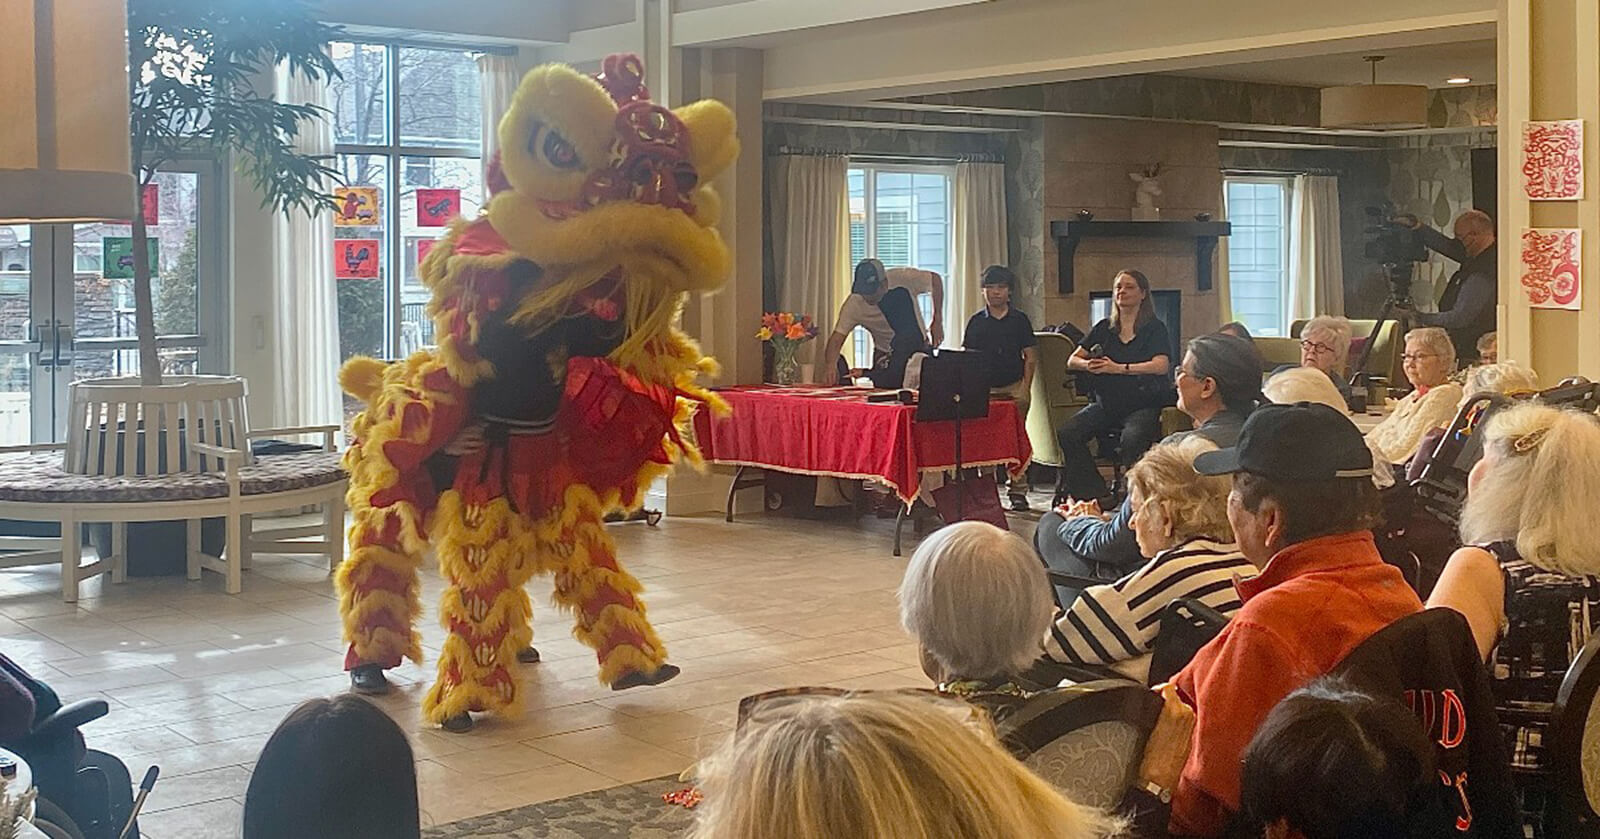 Residents of The Waters on 50th in Minneapolis watching a vibrant lion dance performance during a cultural event.